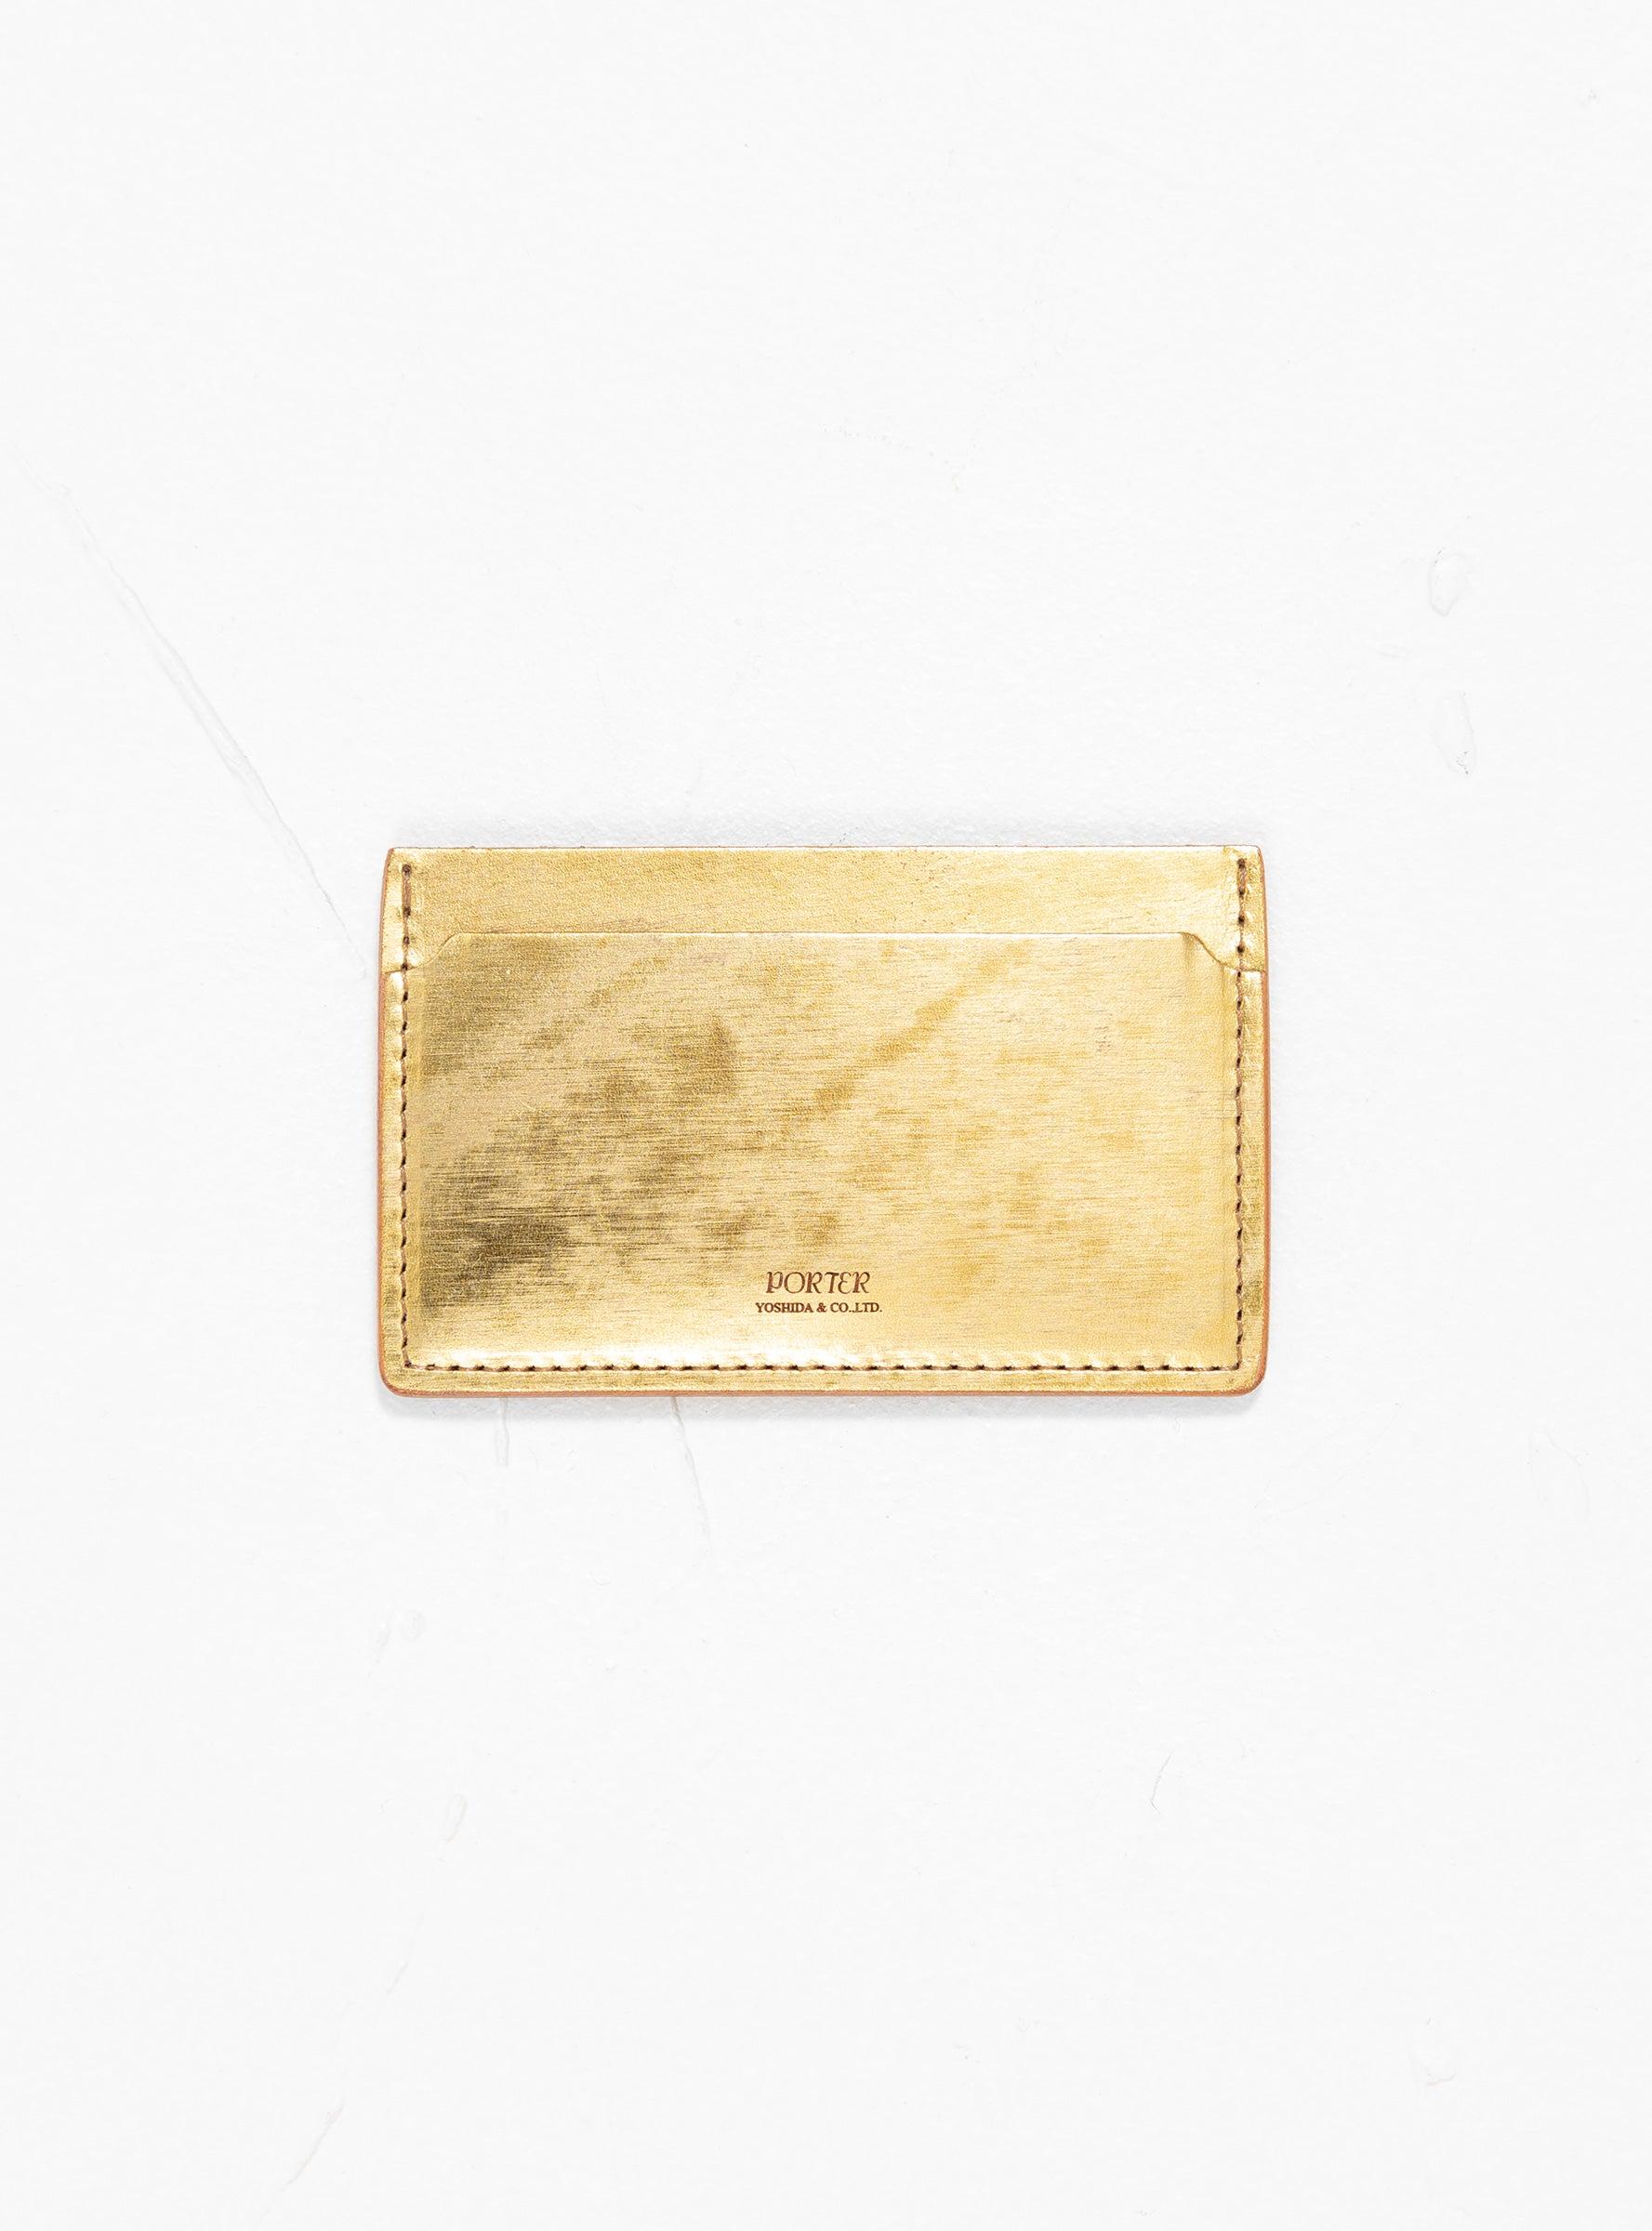 Porter-Yoshida and Co Foil Card Holder Gold in White | Lyst